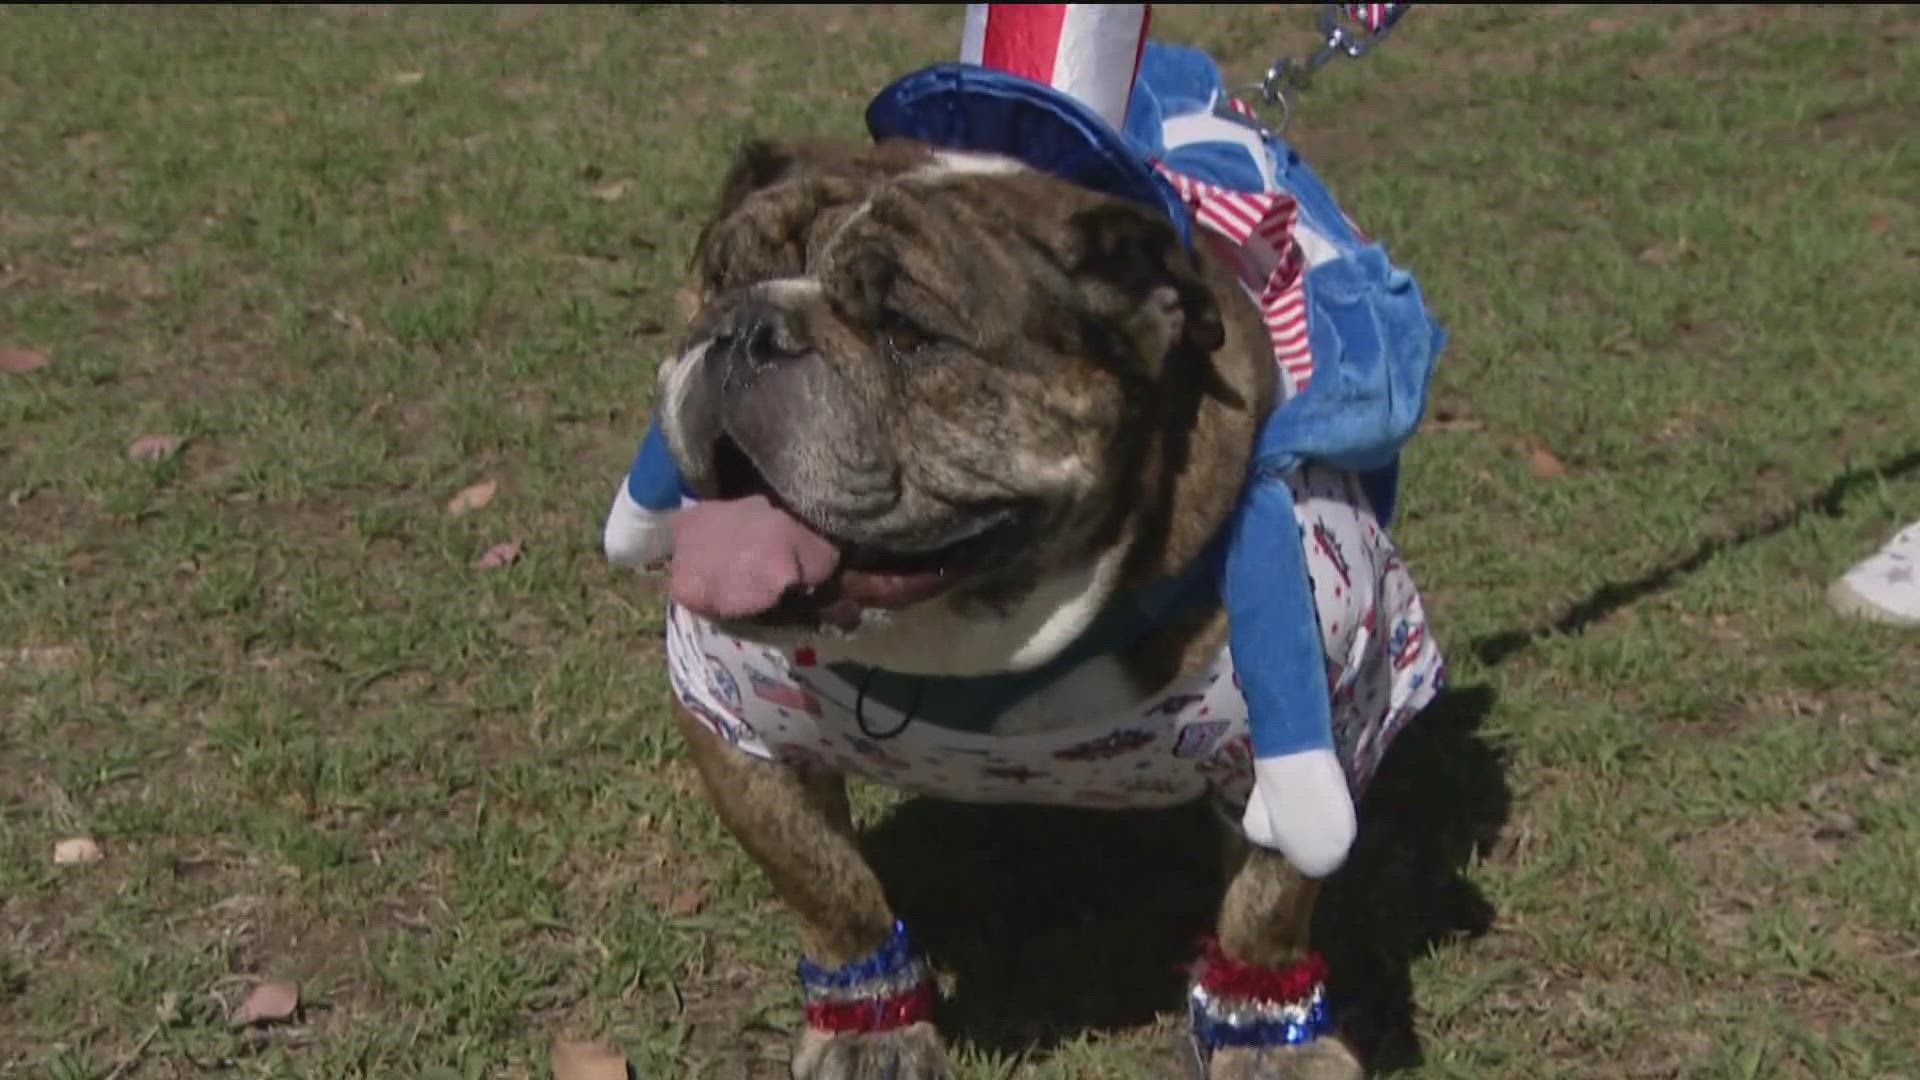 Bentley, the bulldog, may come from British decent, but he bleeds Red, White and drool!